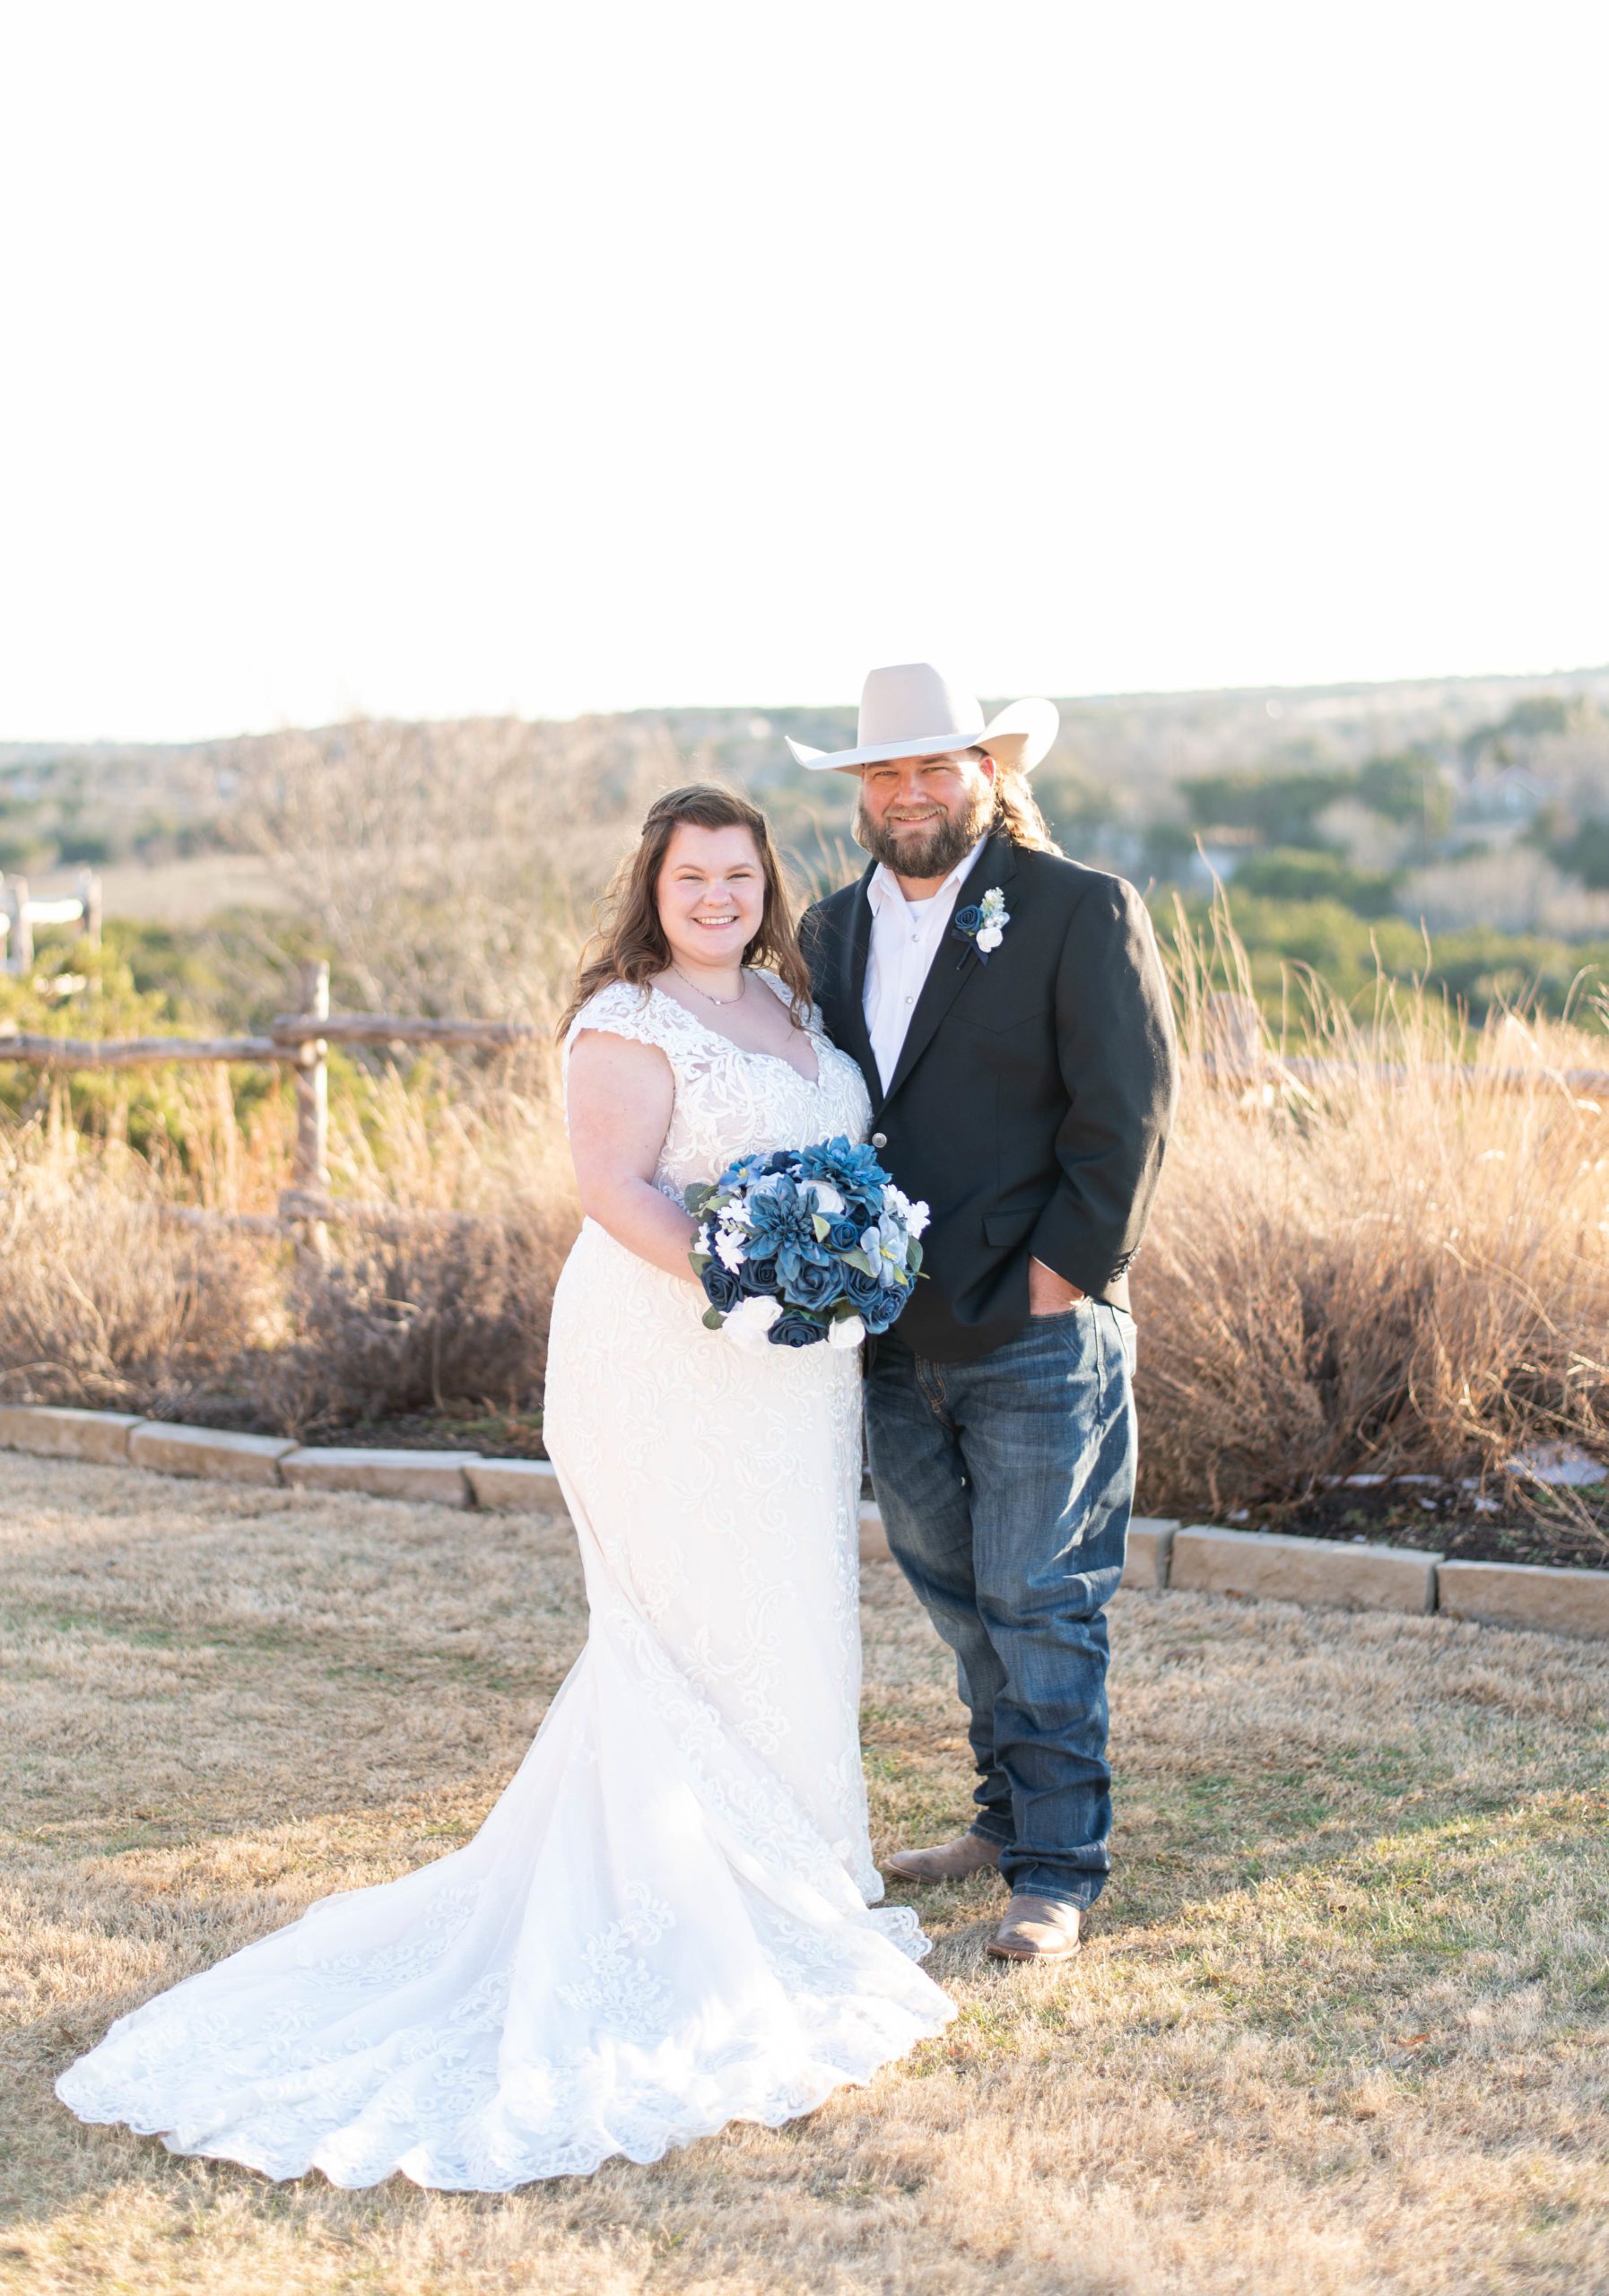 bride and groom are both smiling at the camera holding a blue bouquet with white and blue florals as the sun sets behind them